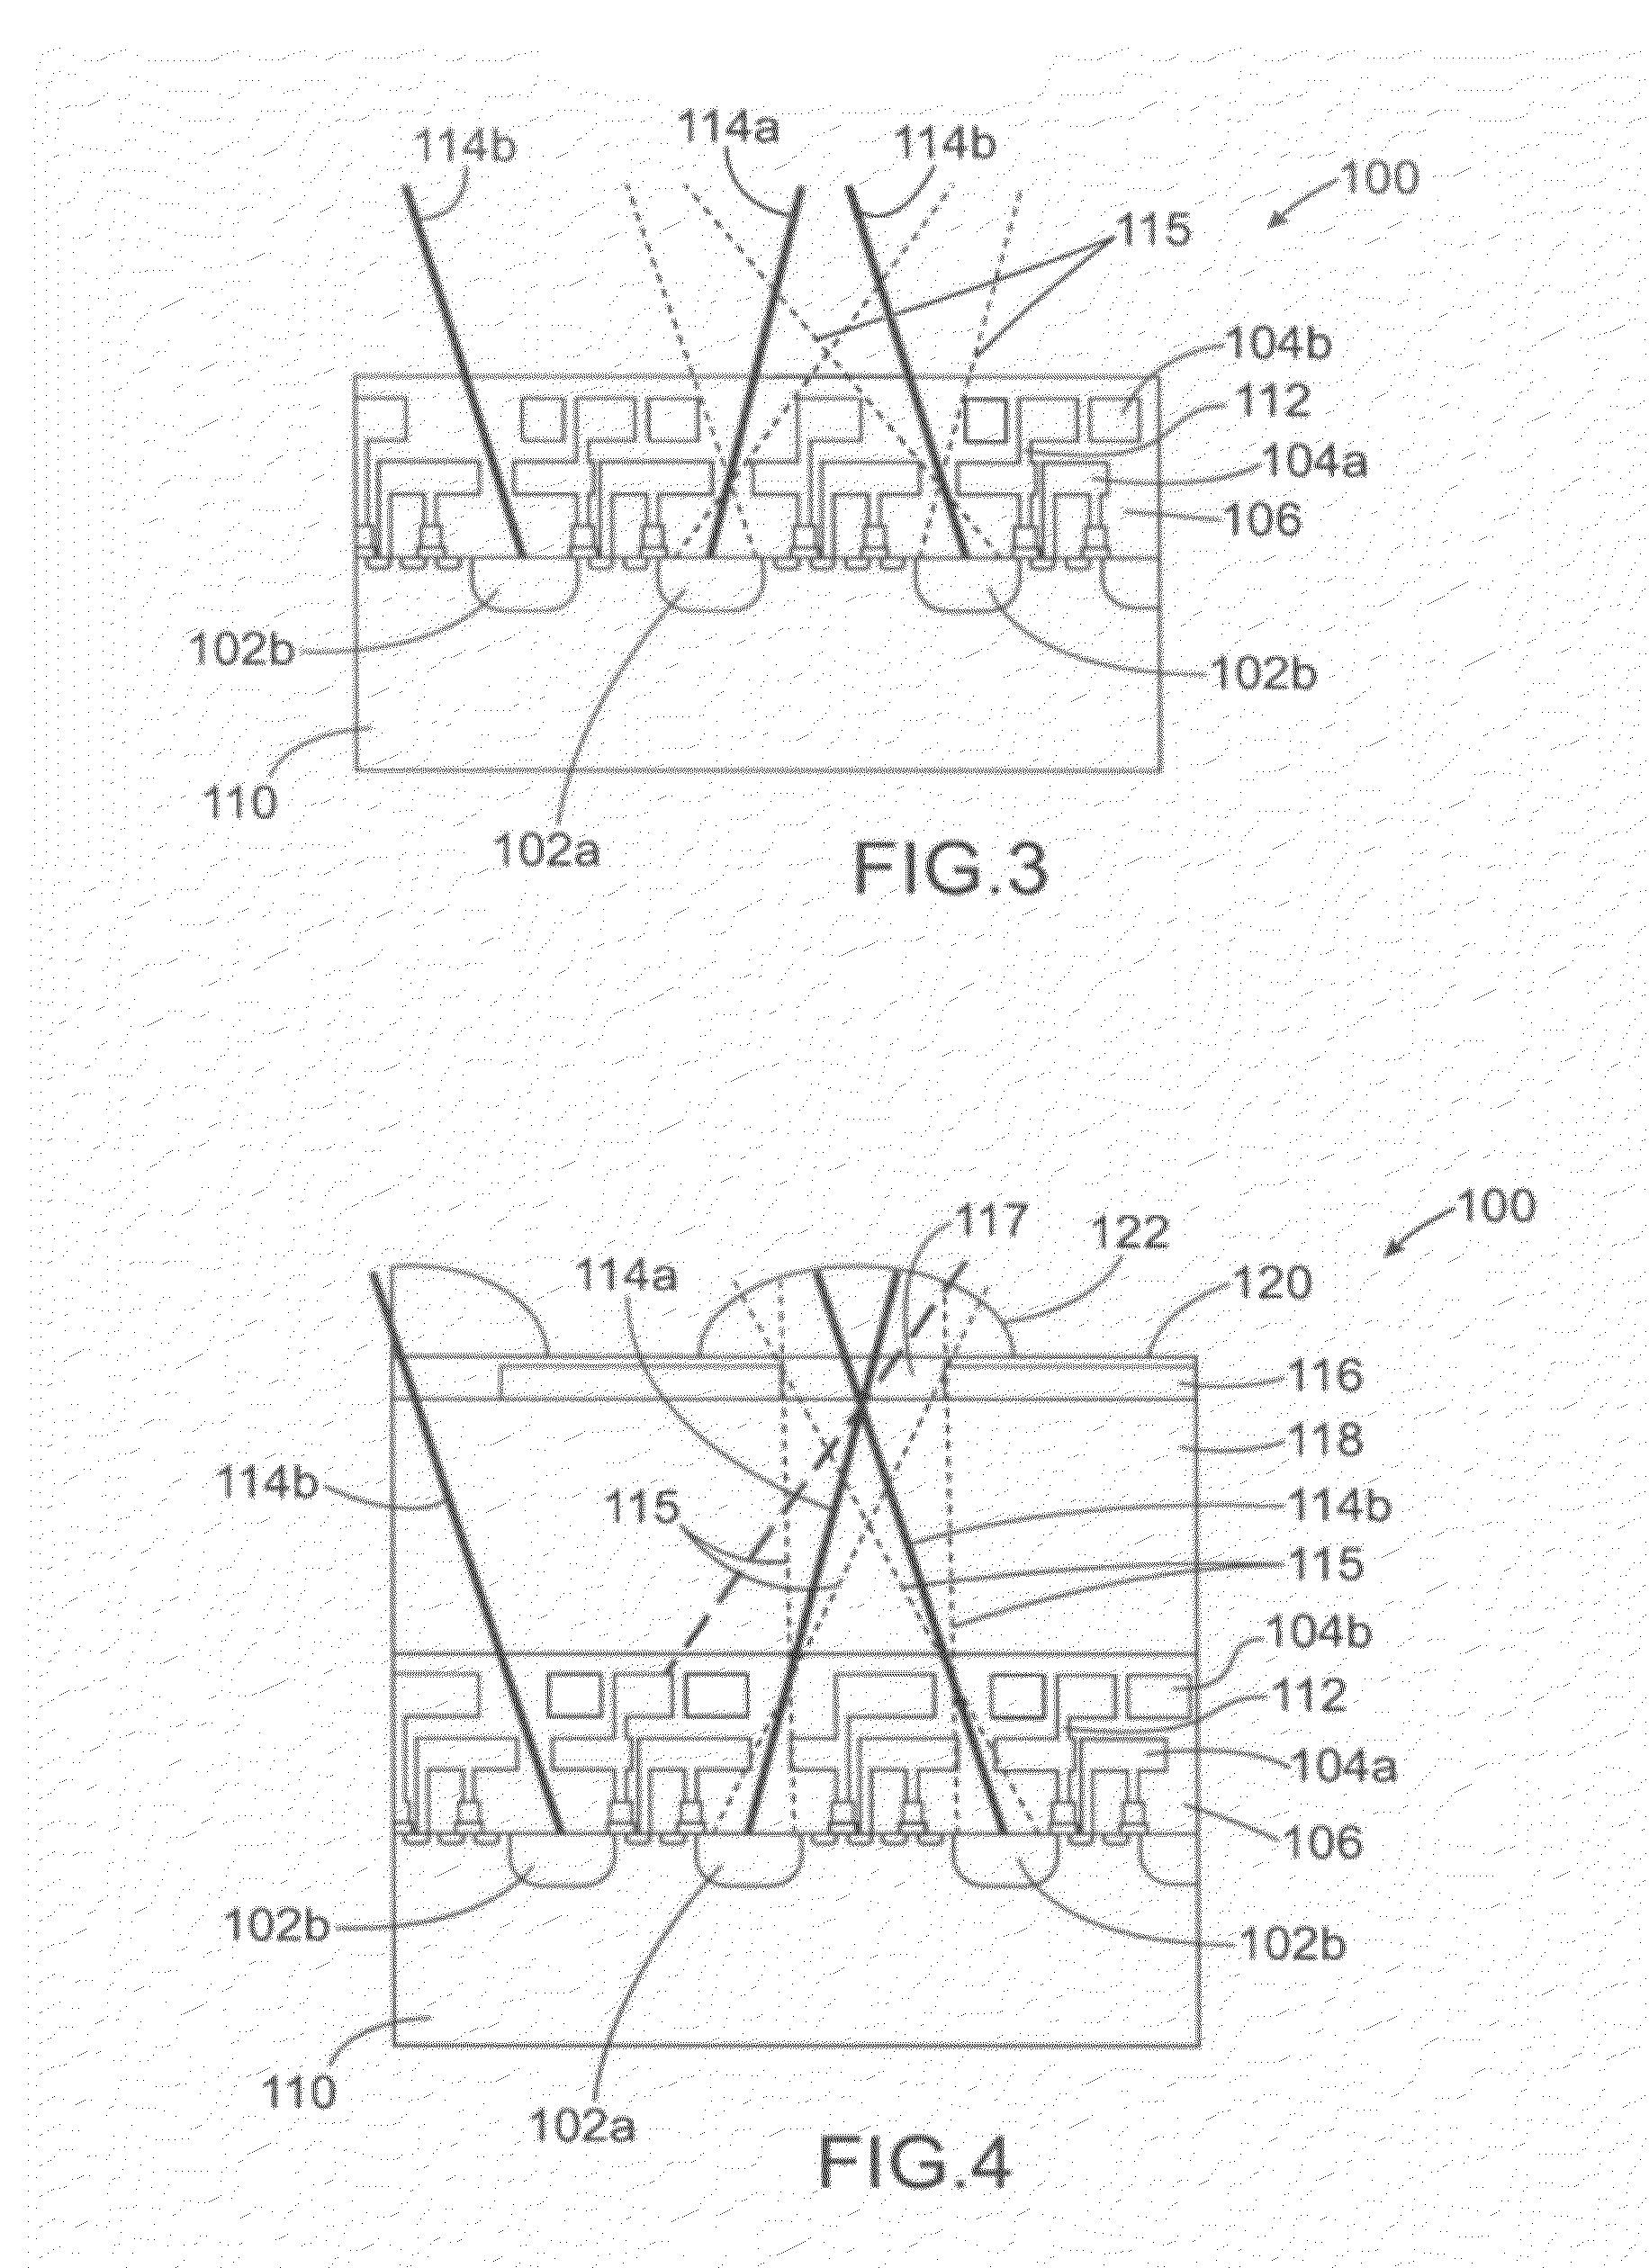 Imager integrated circuit and stereoscopic image capture device